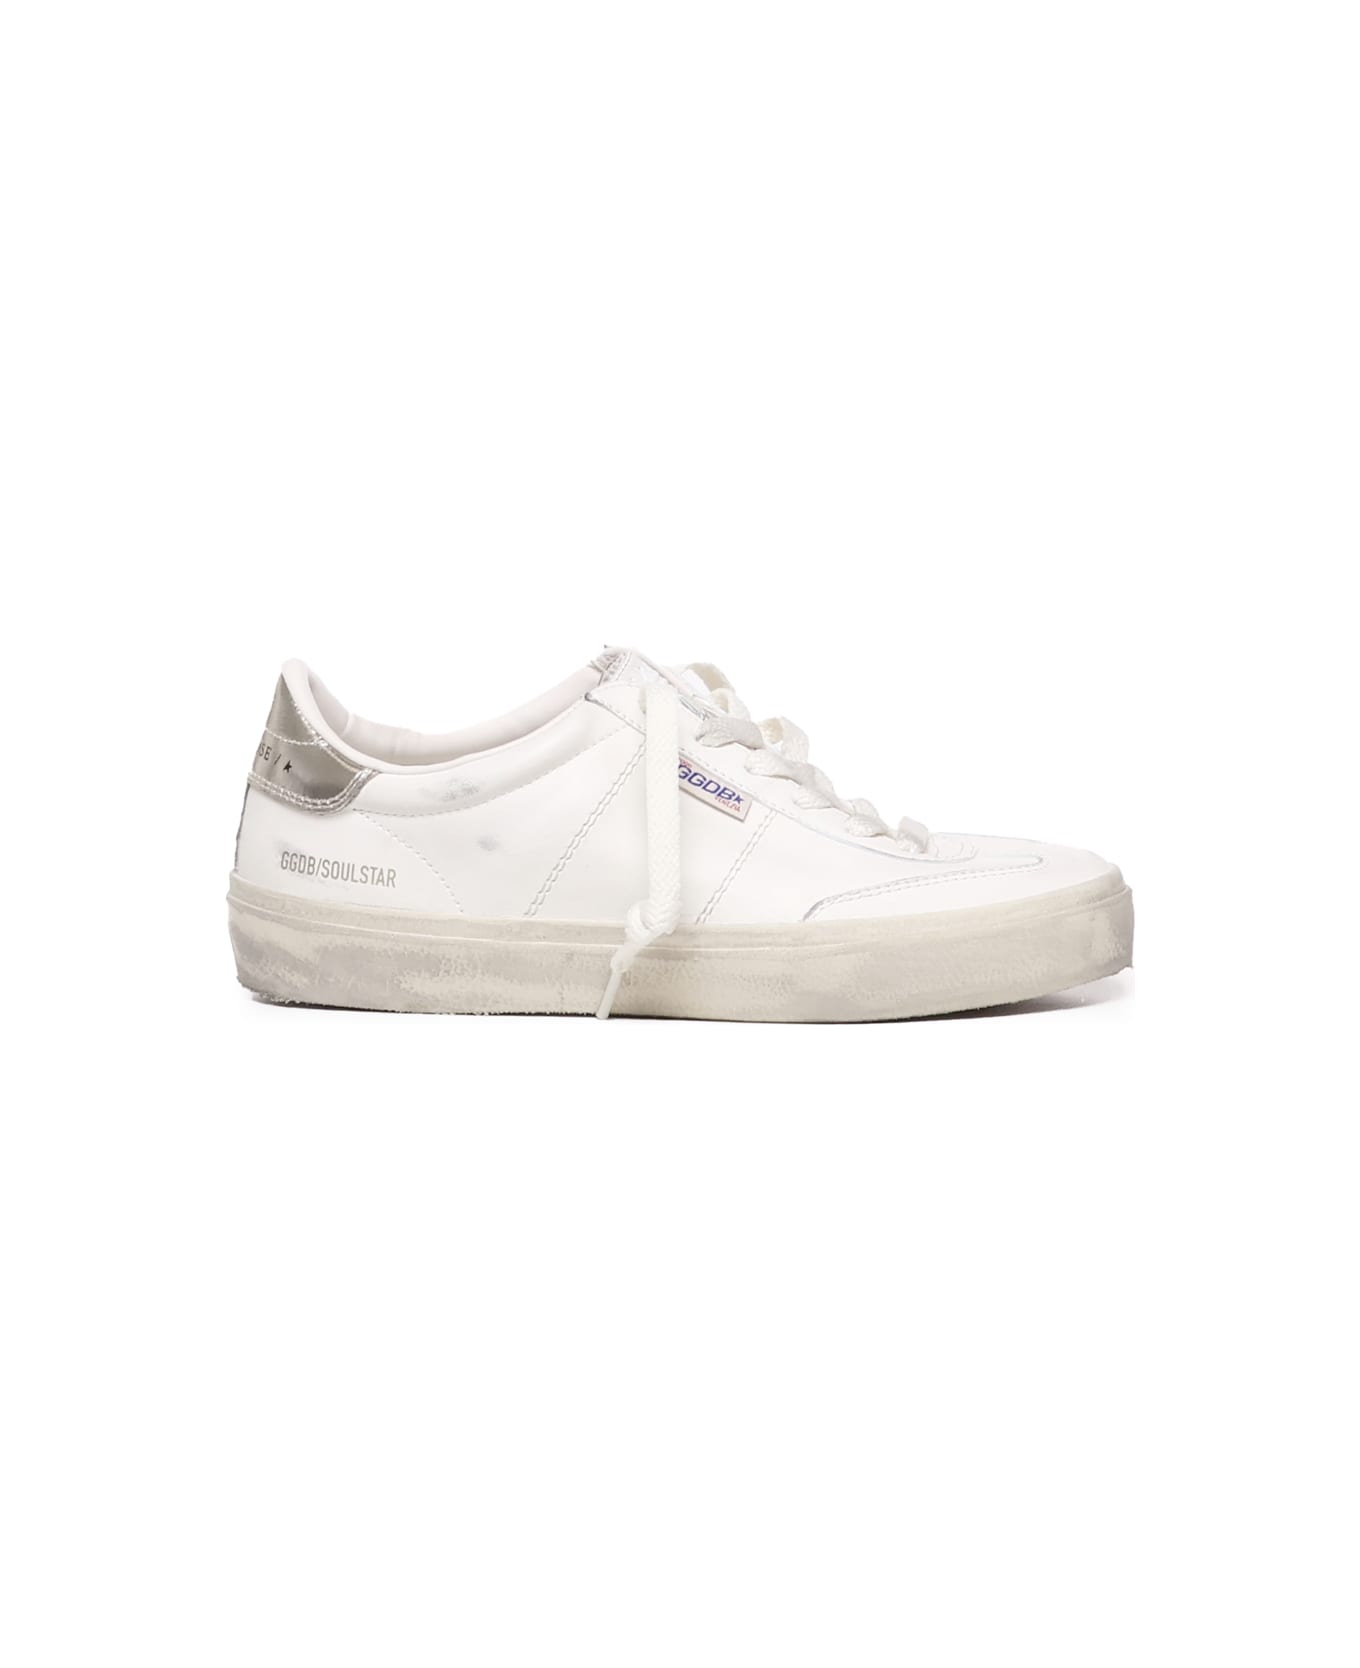 Golden Goose Soul Star Leather crisi - WHITE/GOLD